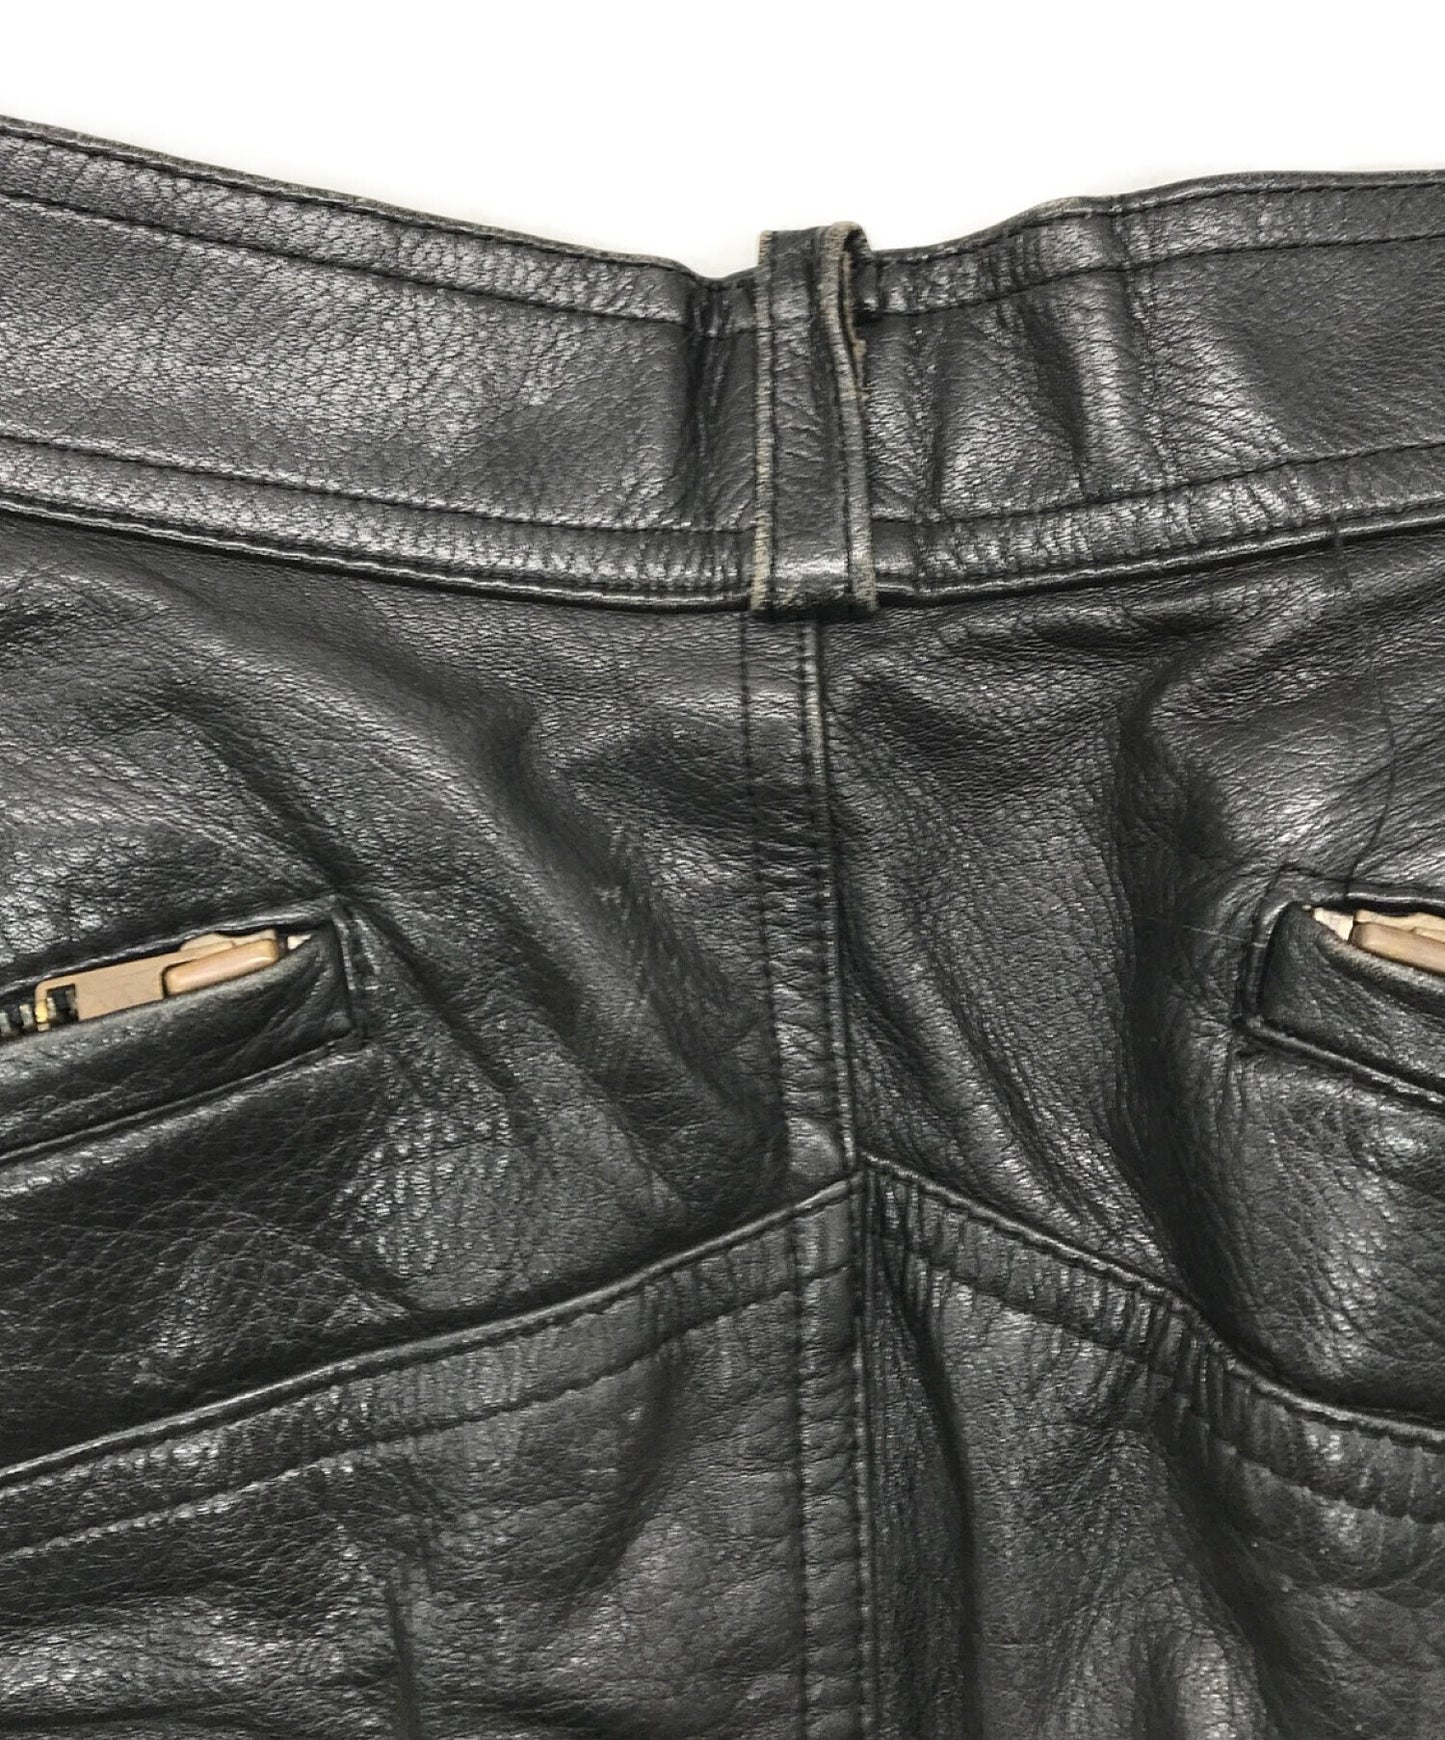 [Pre-owned] ISSEY MIYAKE MEN Archival Leather Pants LQ43037